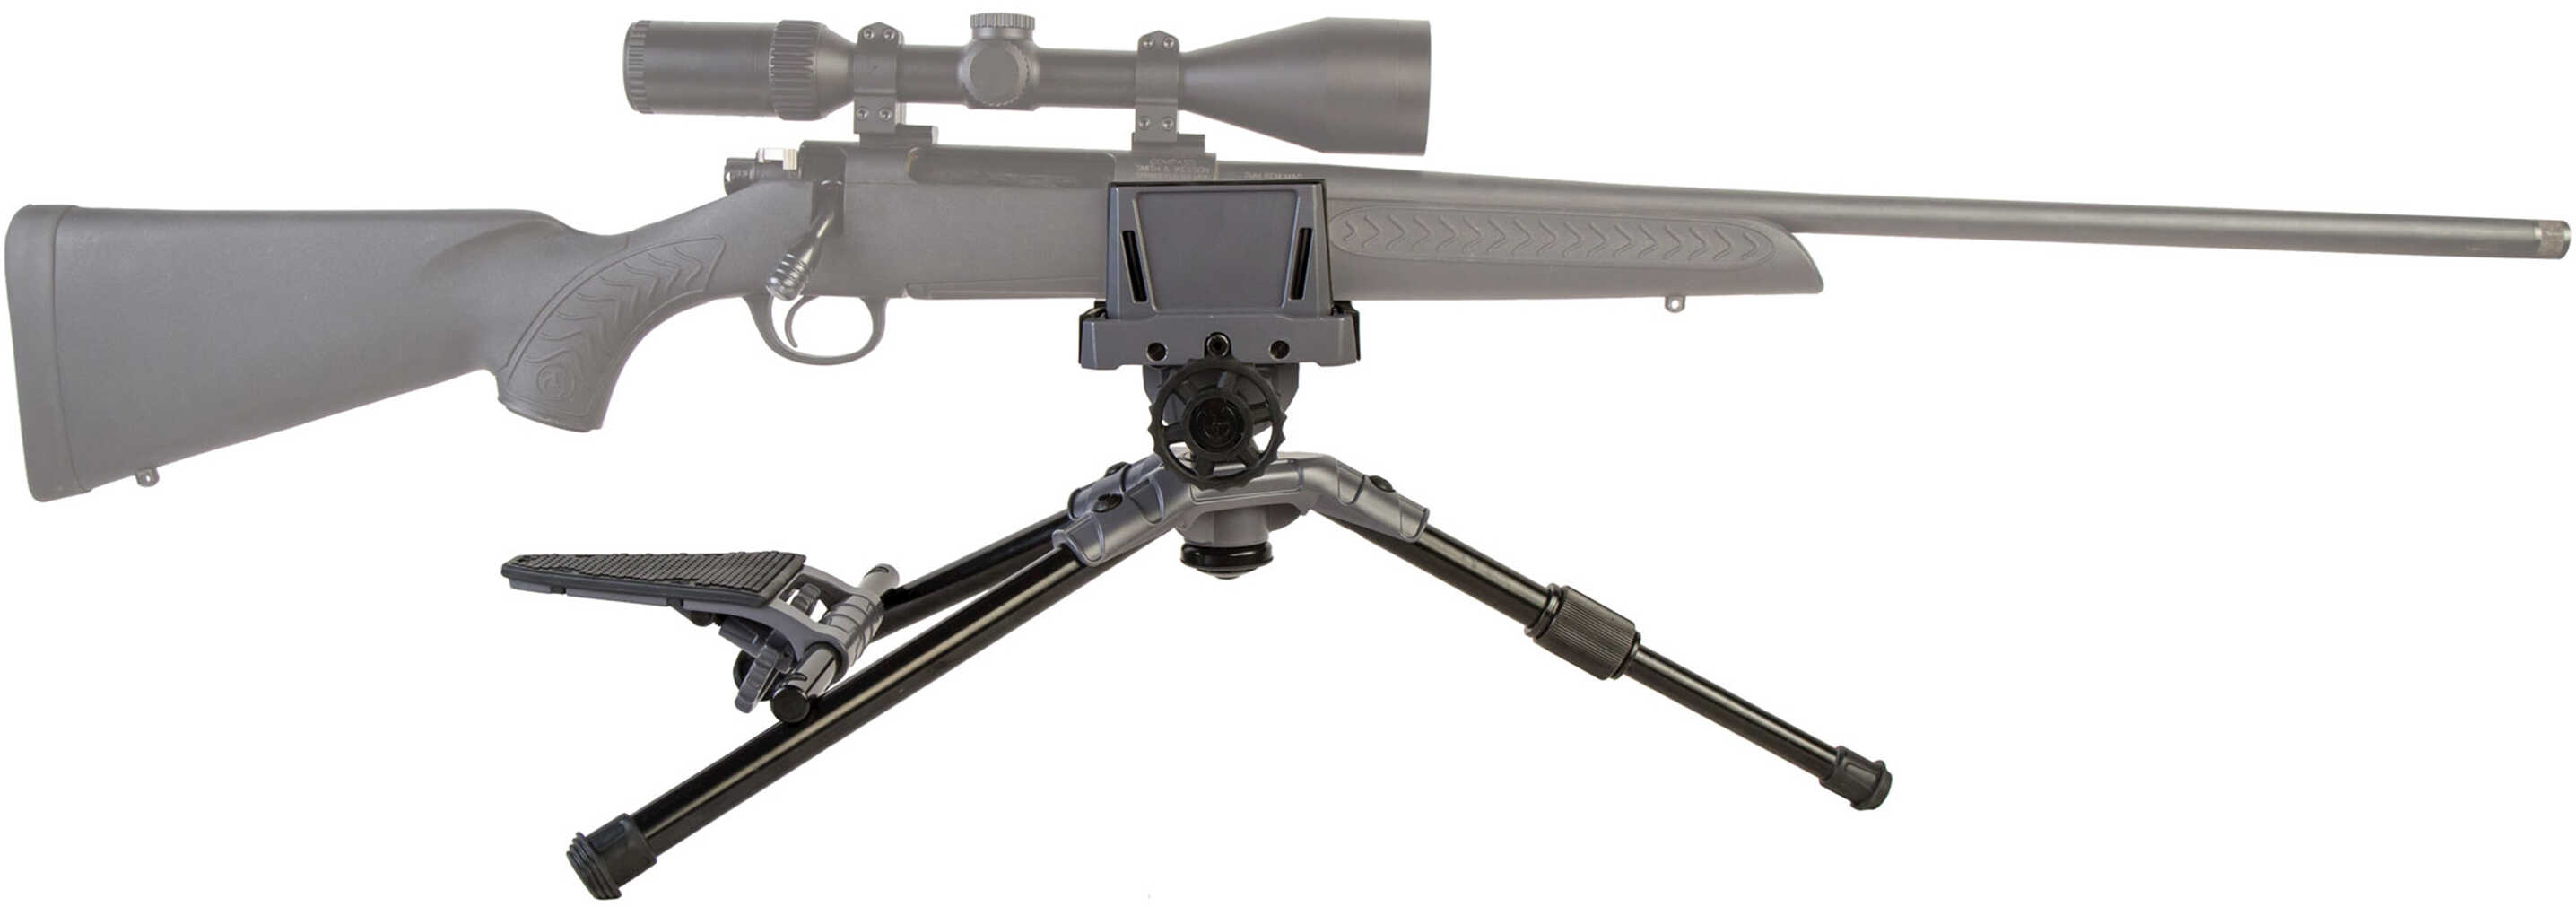 Caldwell Precision Turret Shooting Rest For AR-15